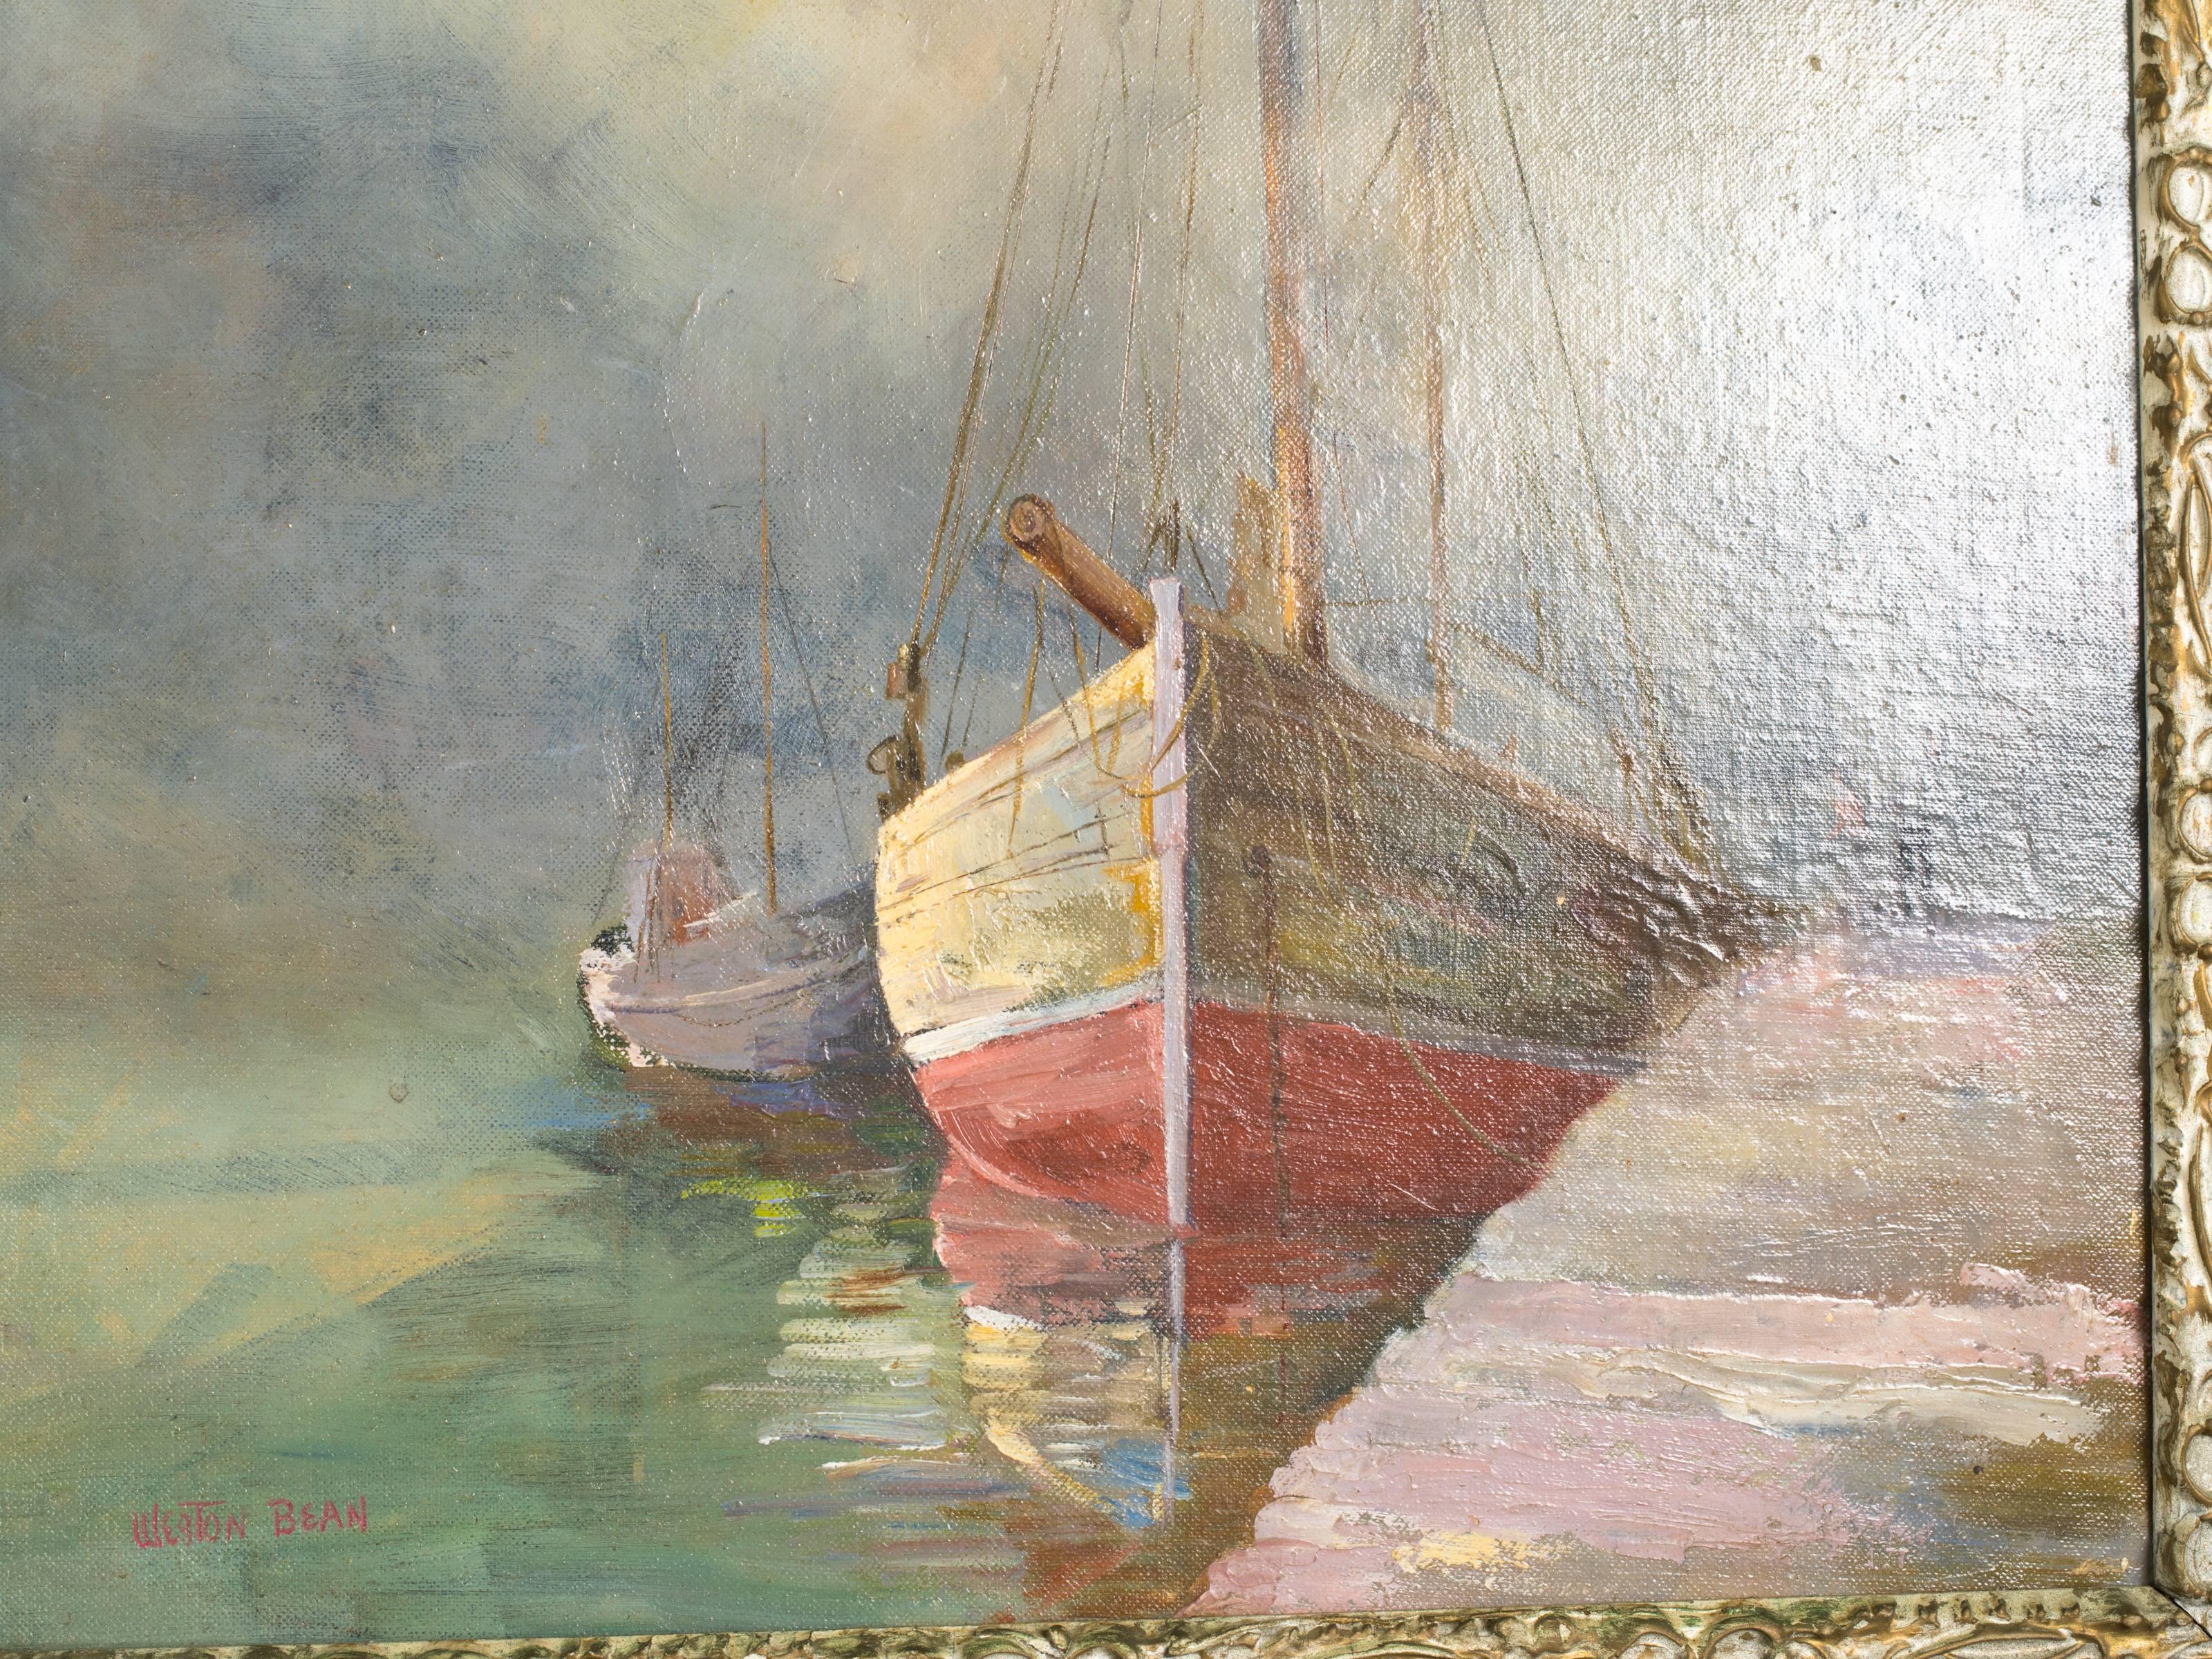 Mid-20th Century Seascape Sailboat Painting by Weston Bean